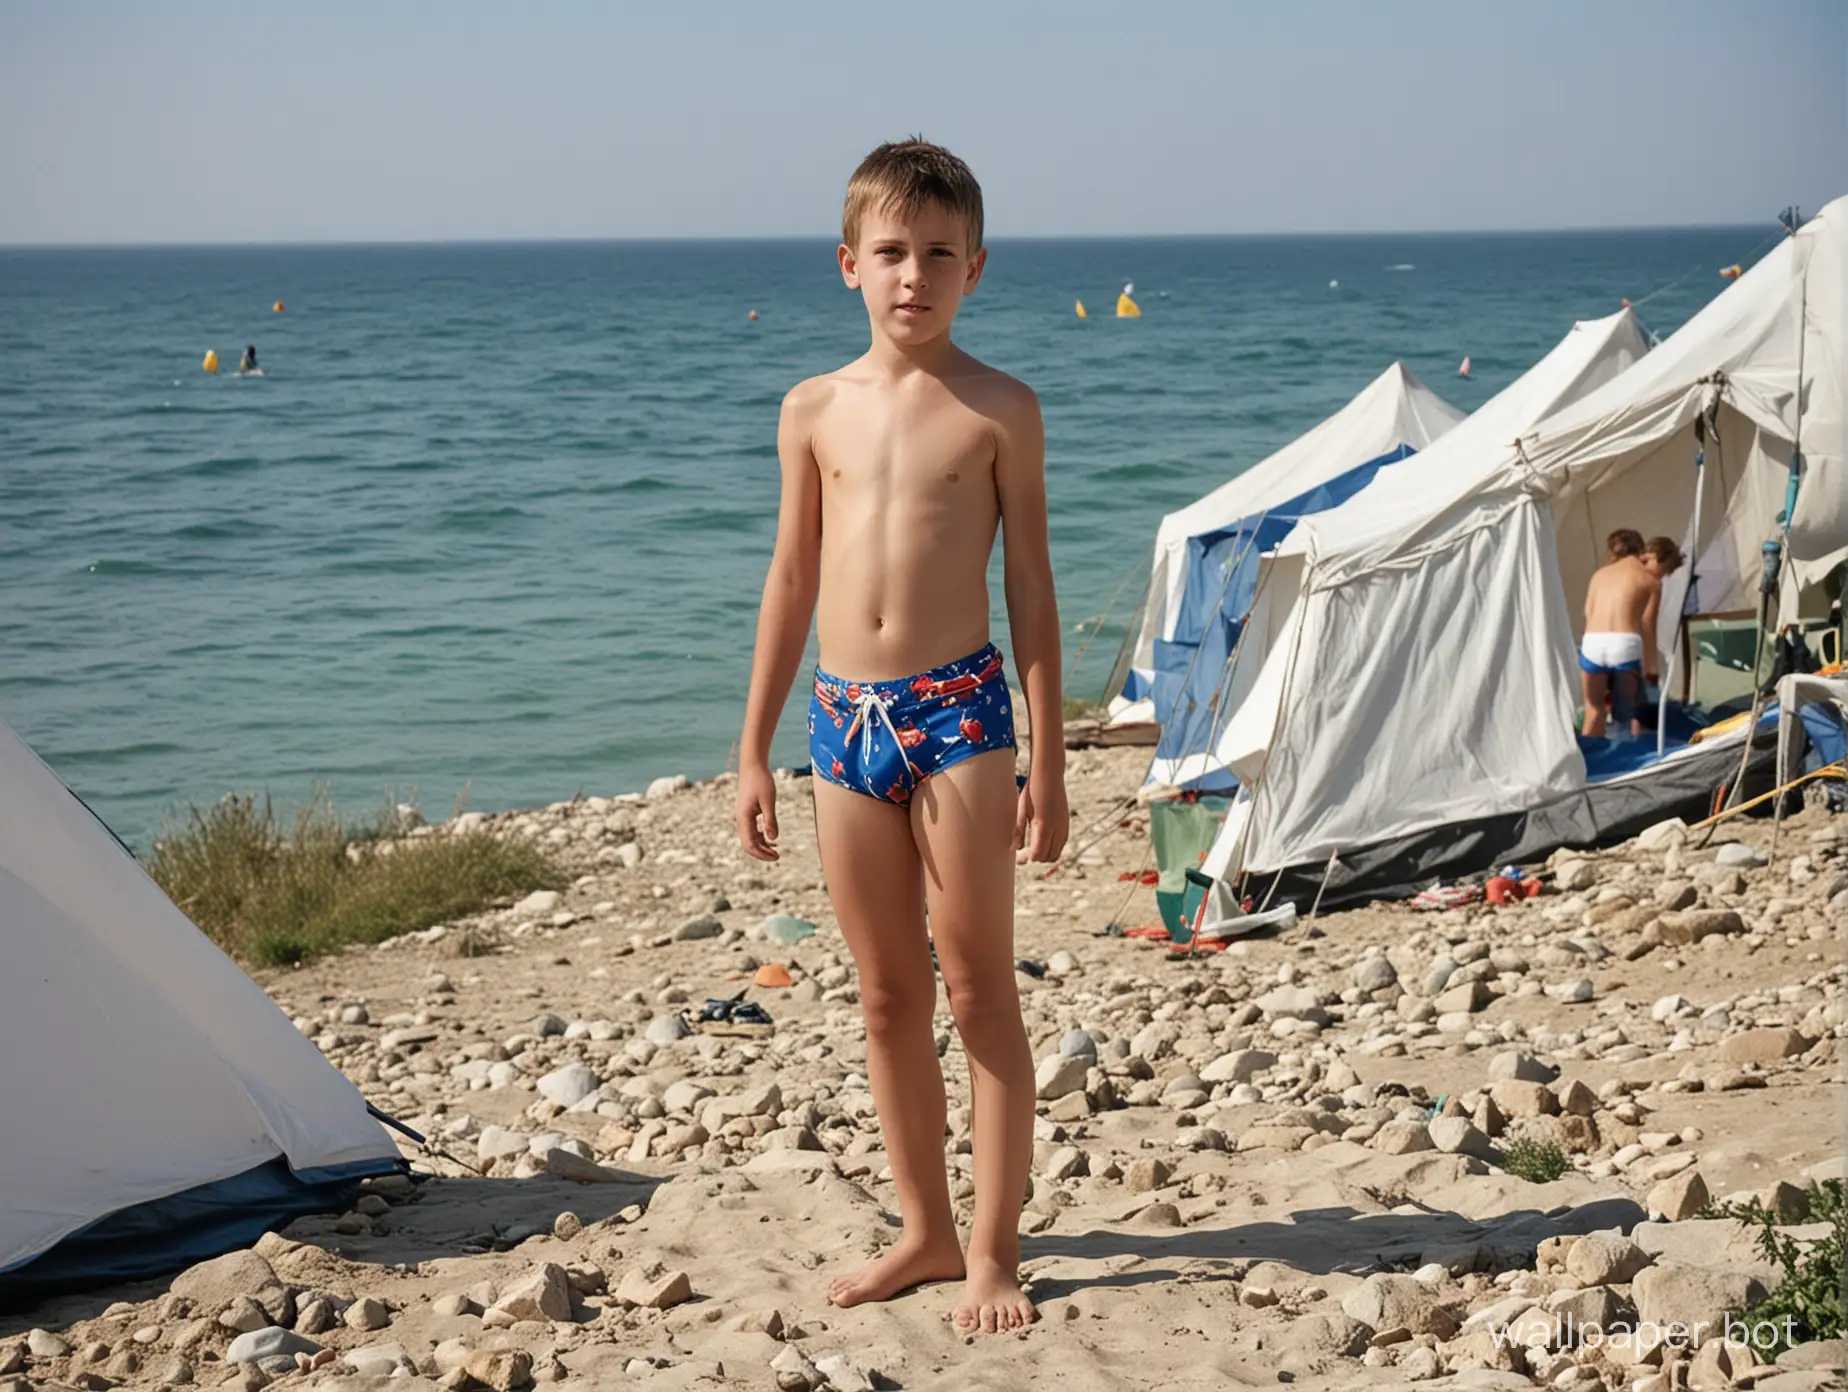 13YearOld-Boy-in-Swimming-Trunks-Flirting-by-a-Tent-with-Sea-Views